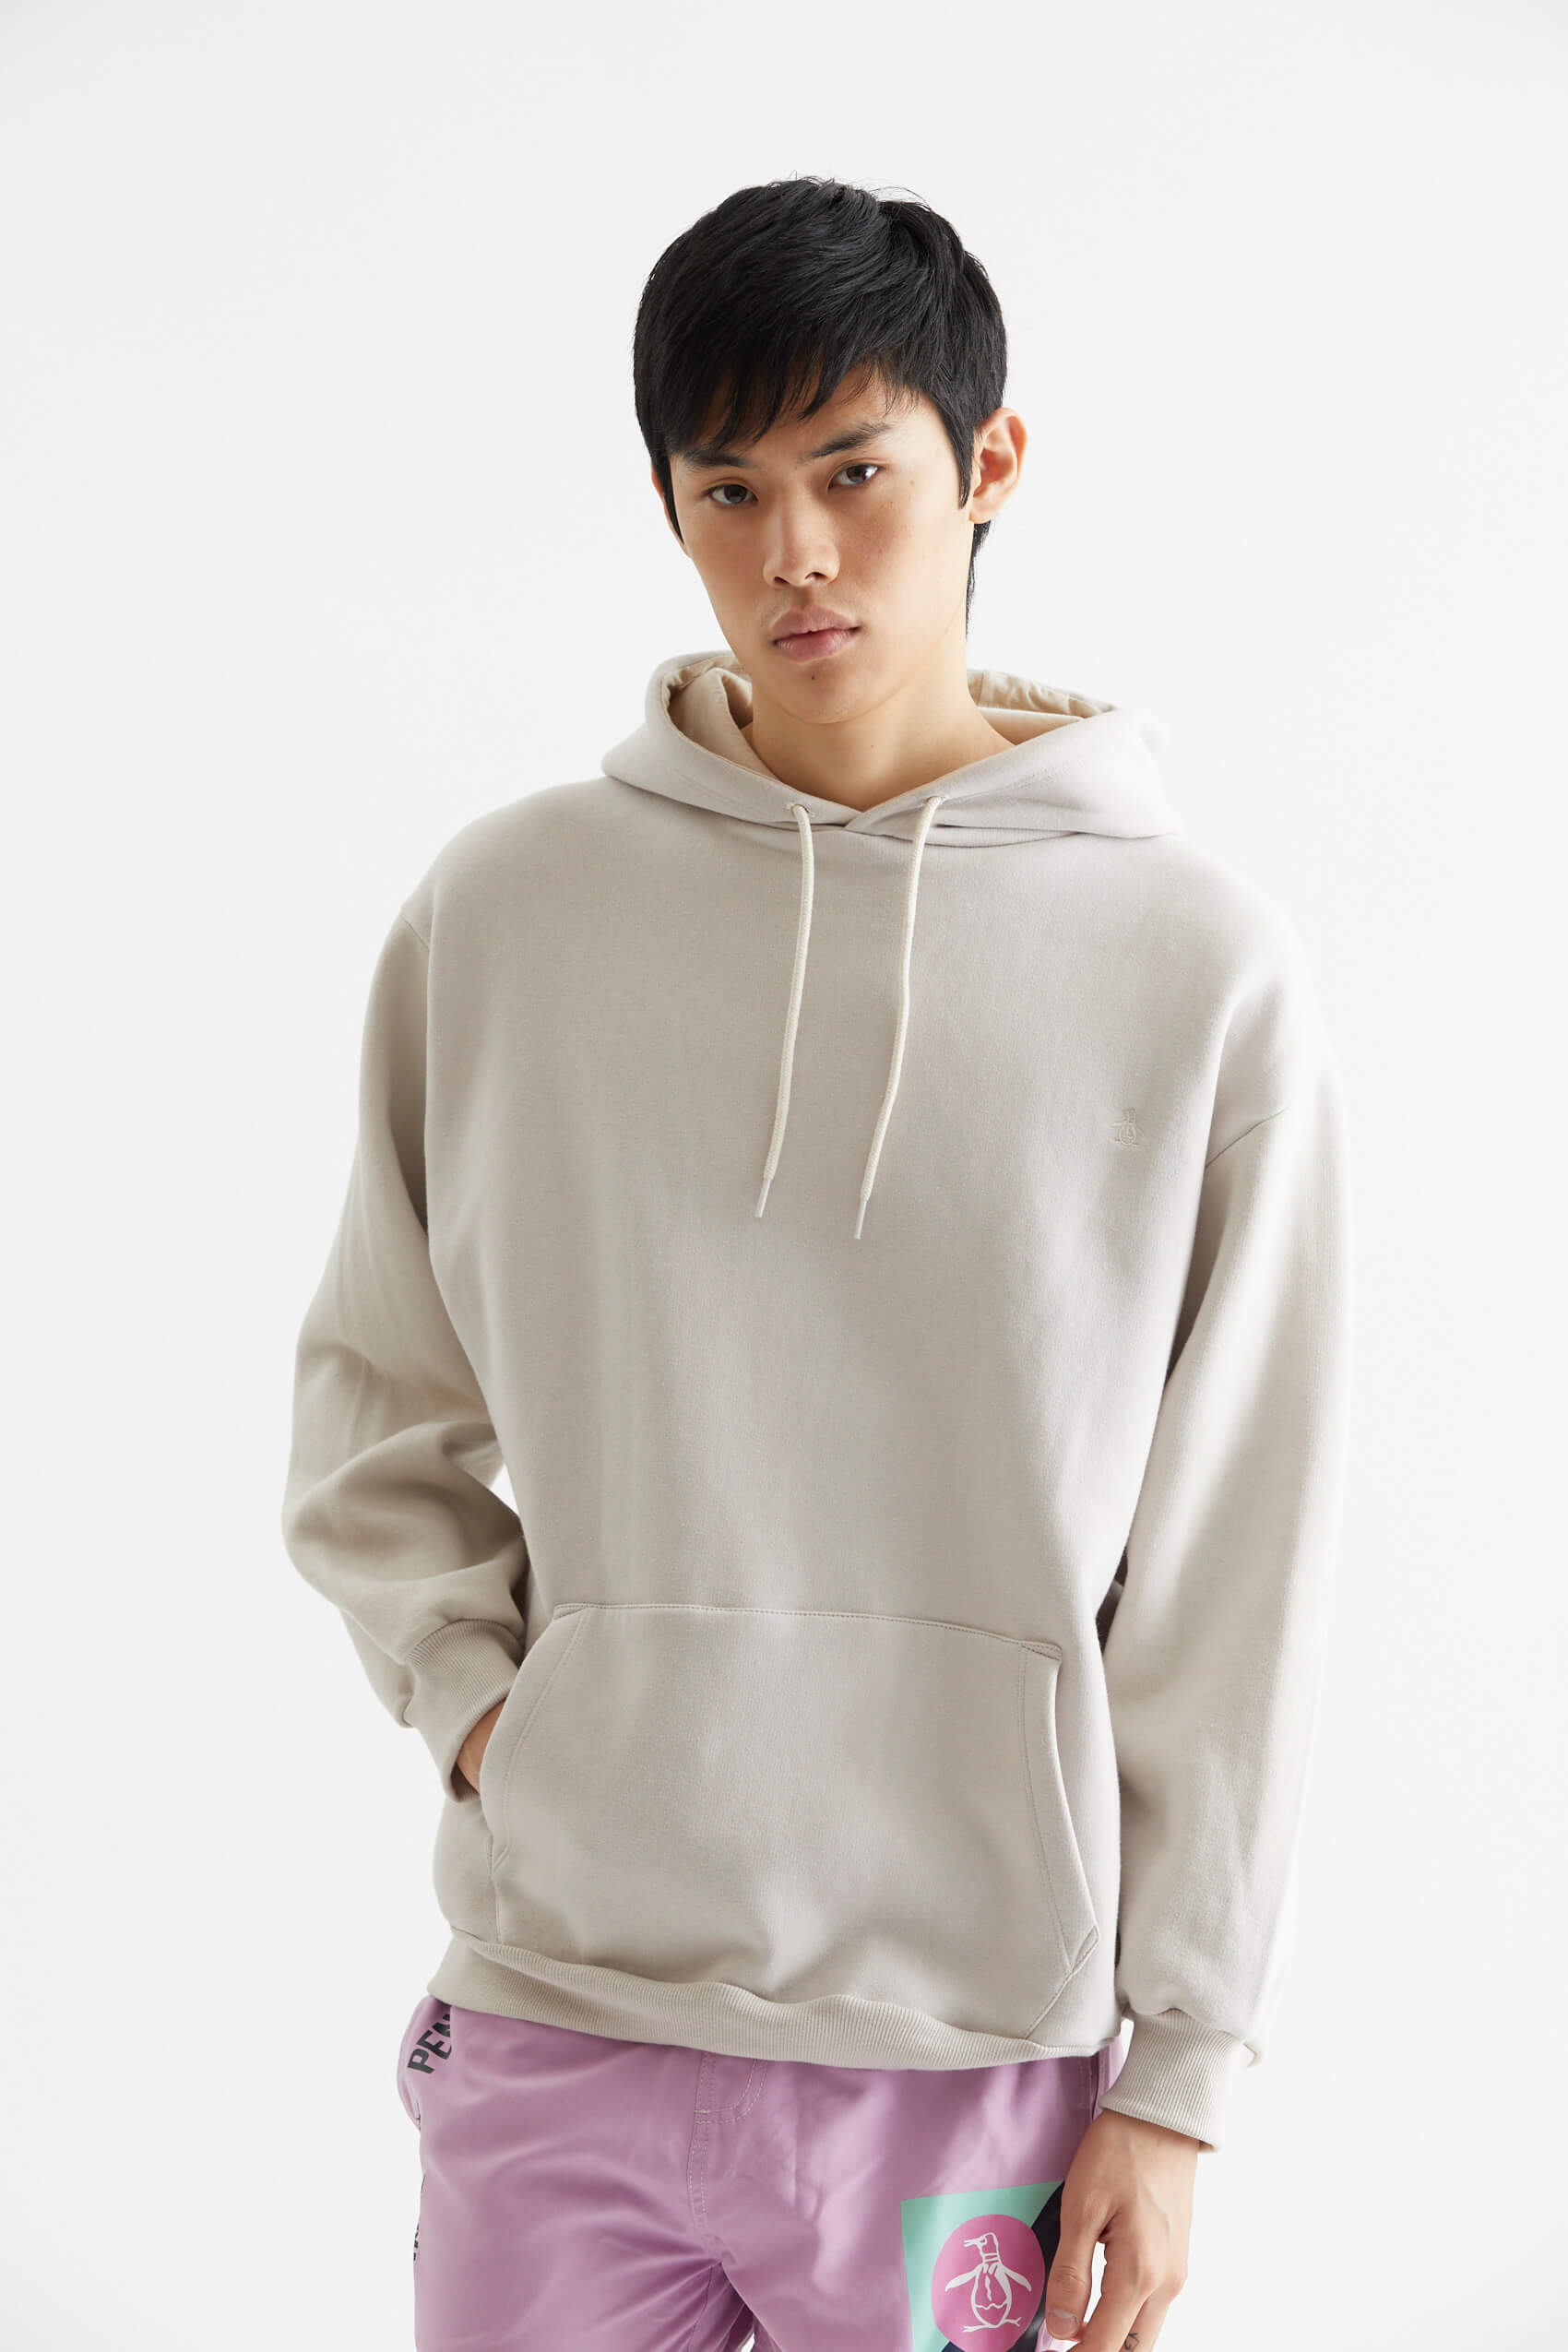 penguin_basic-oversize-hoodie_45-17-2024__picture-41787